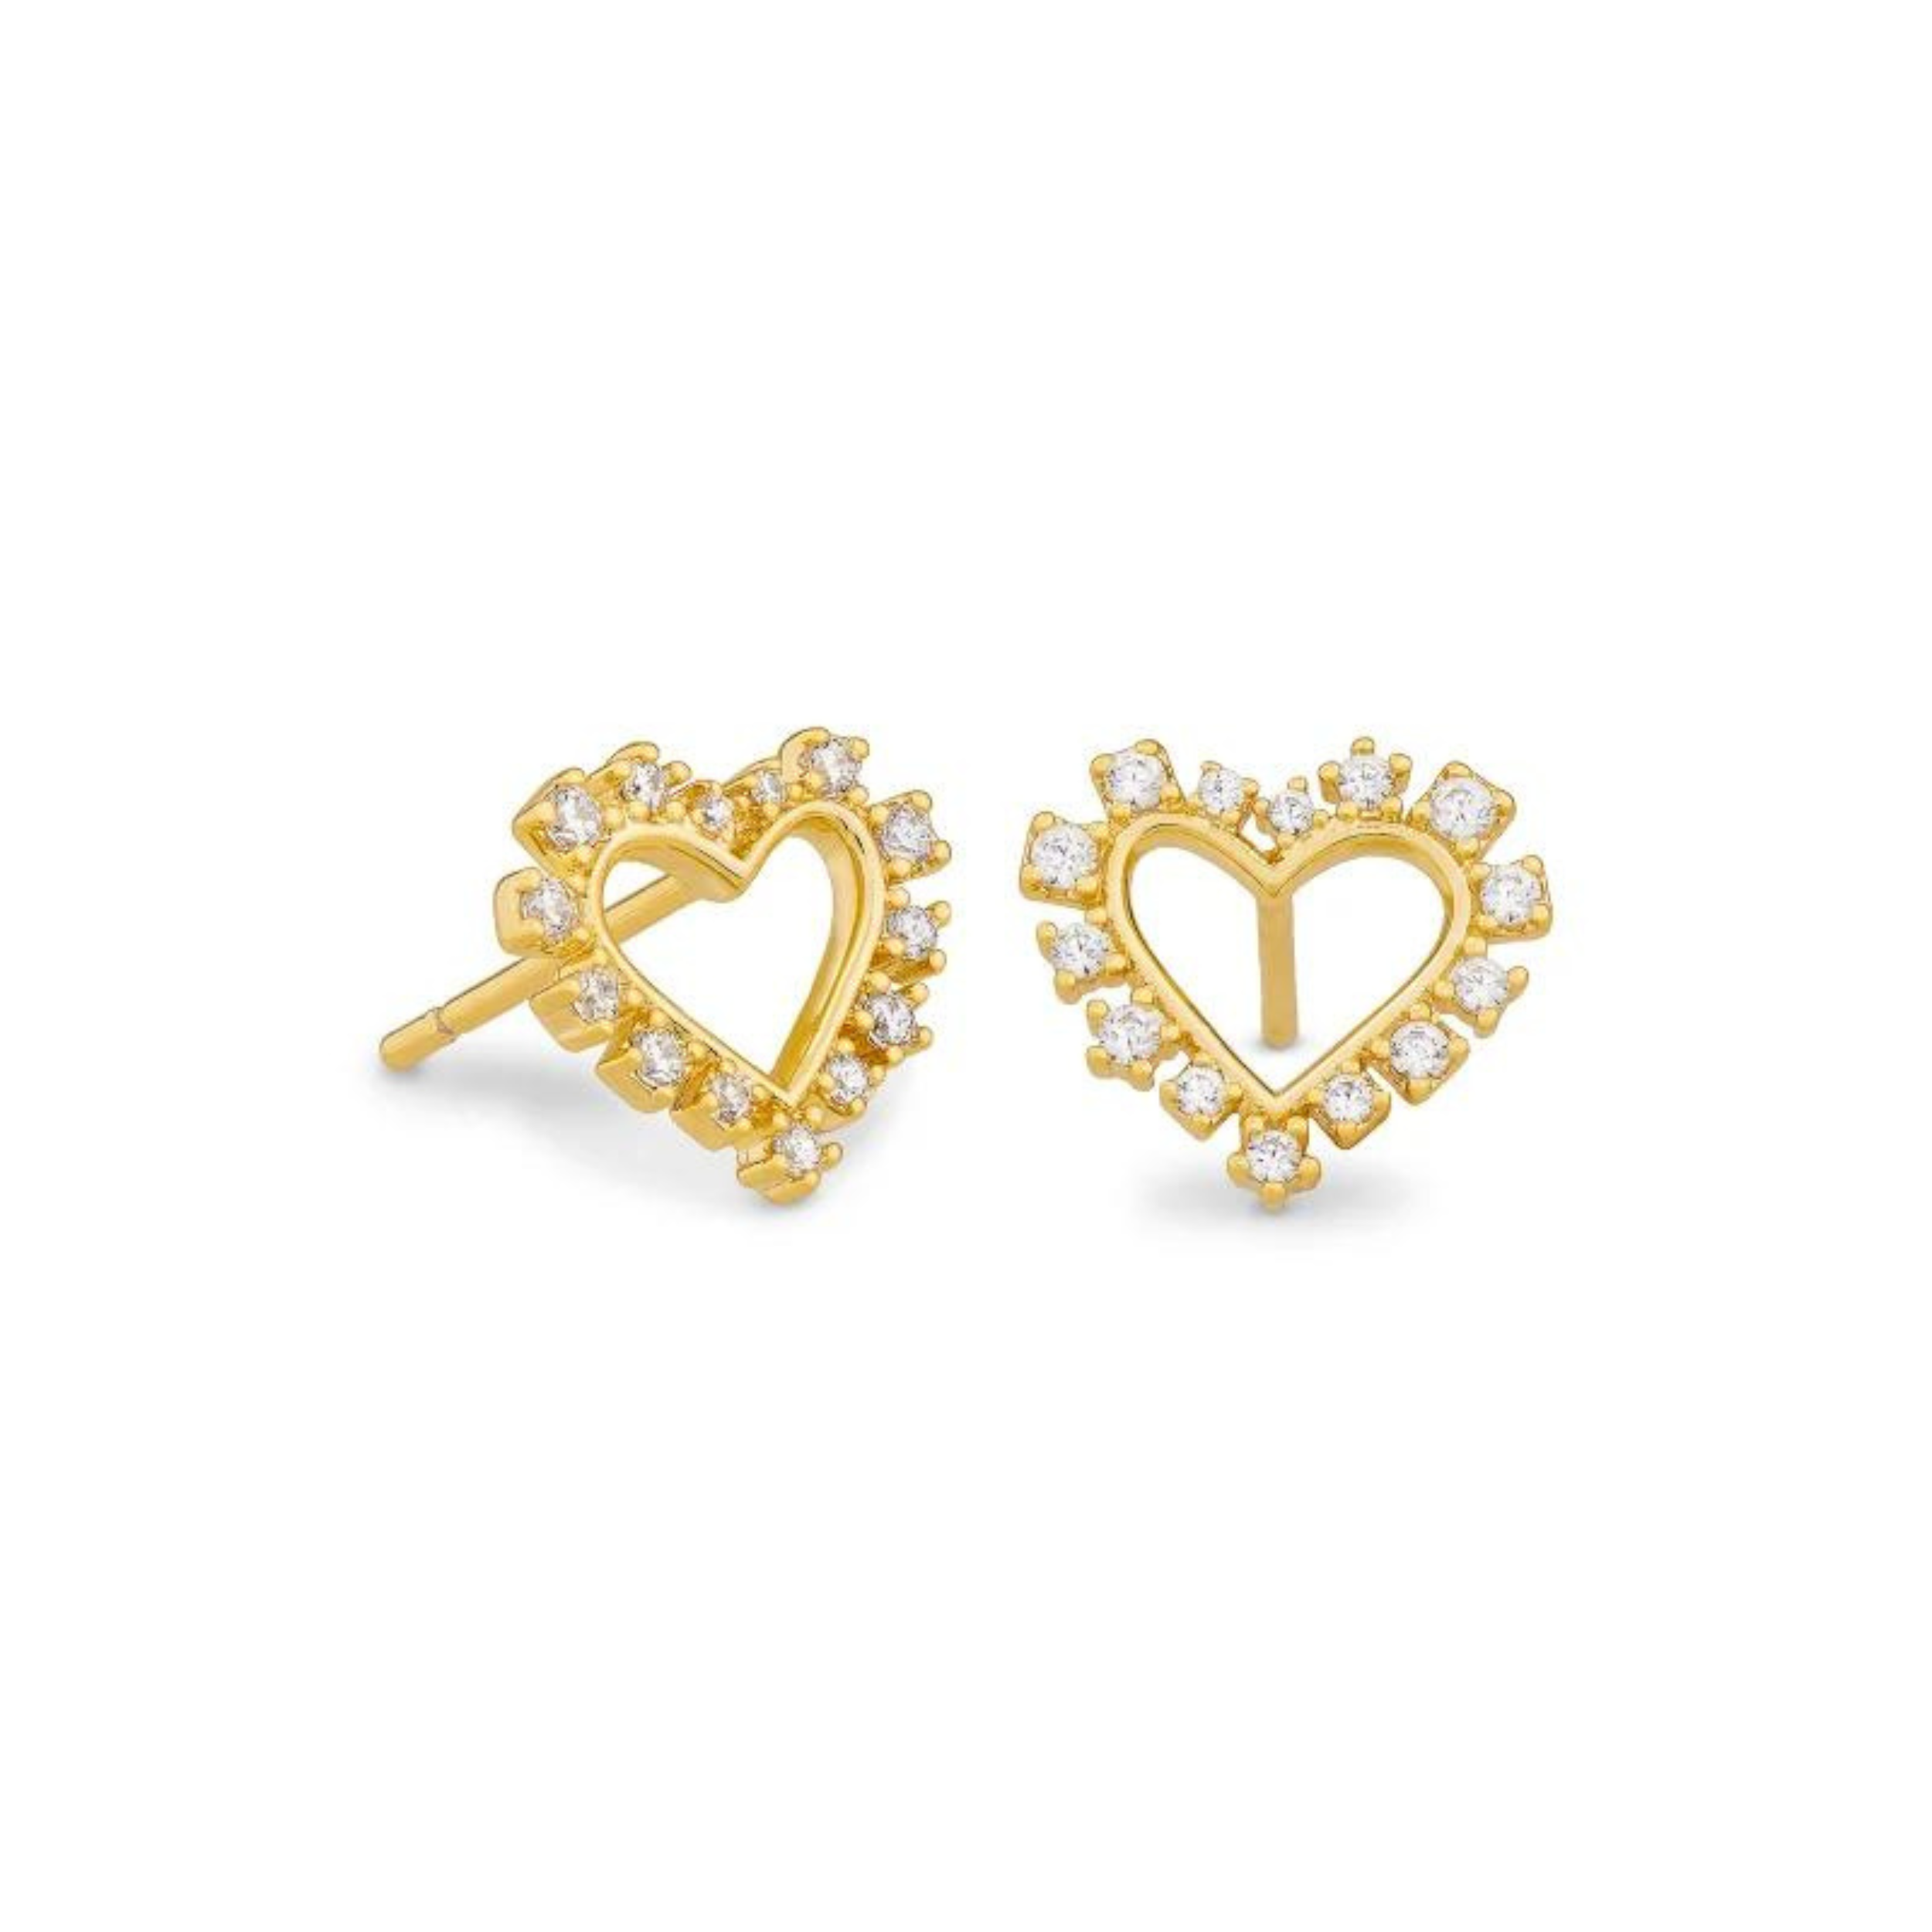 Gold heart shaped earrings with white crystals pictured on a white background.